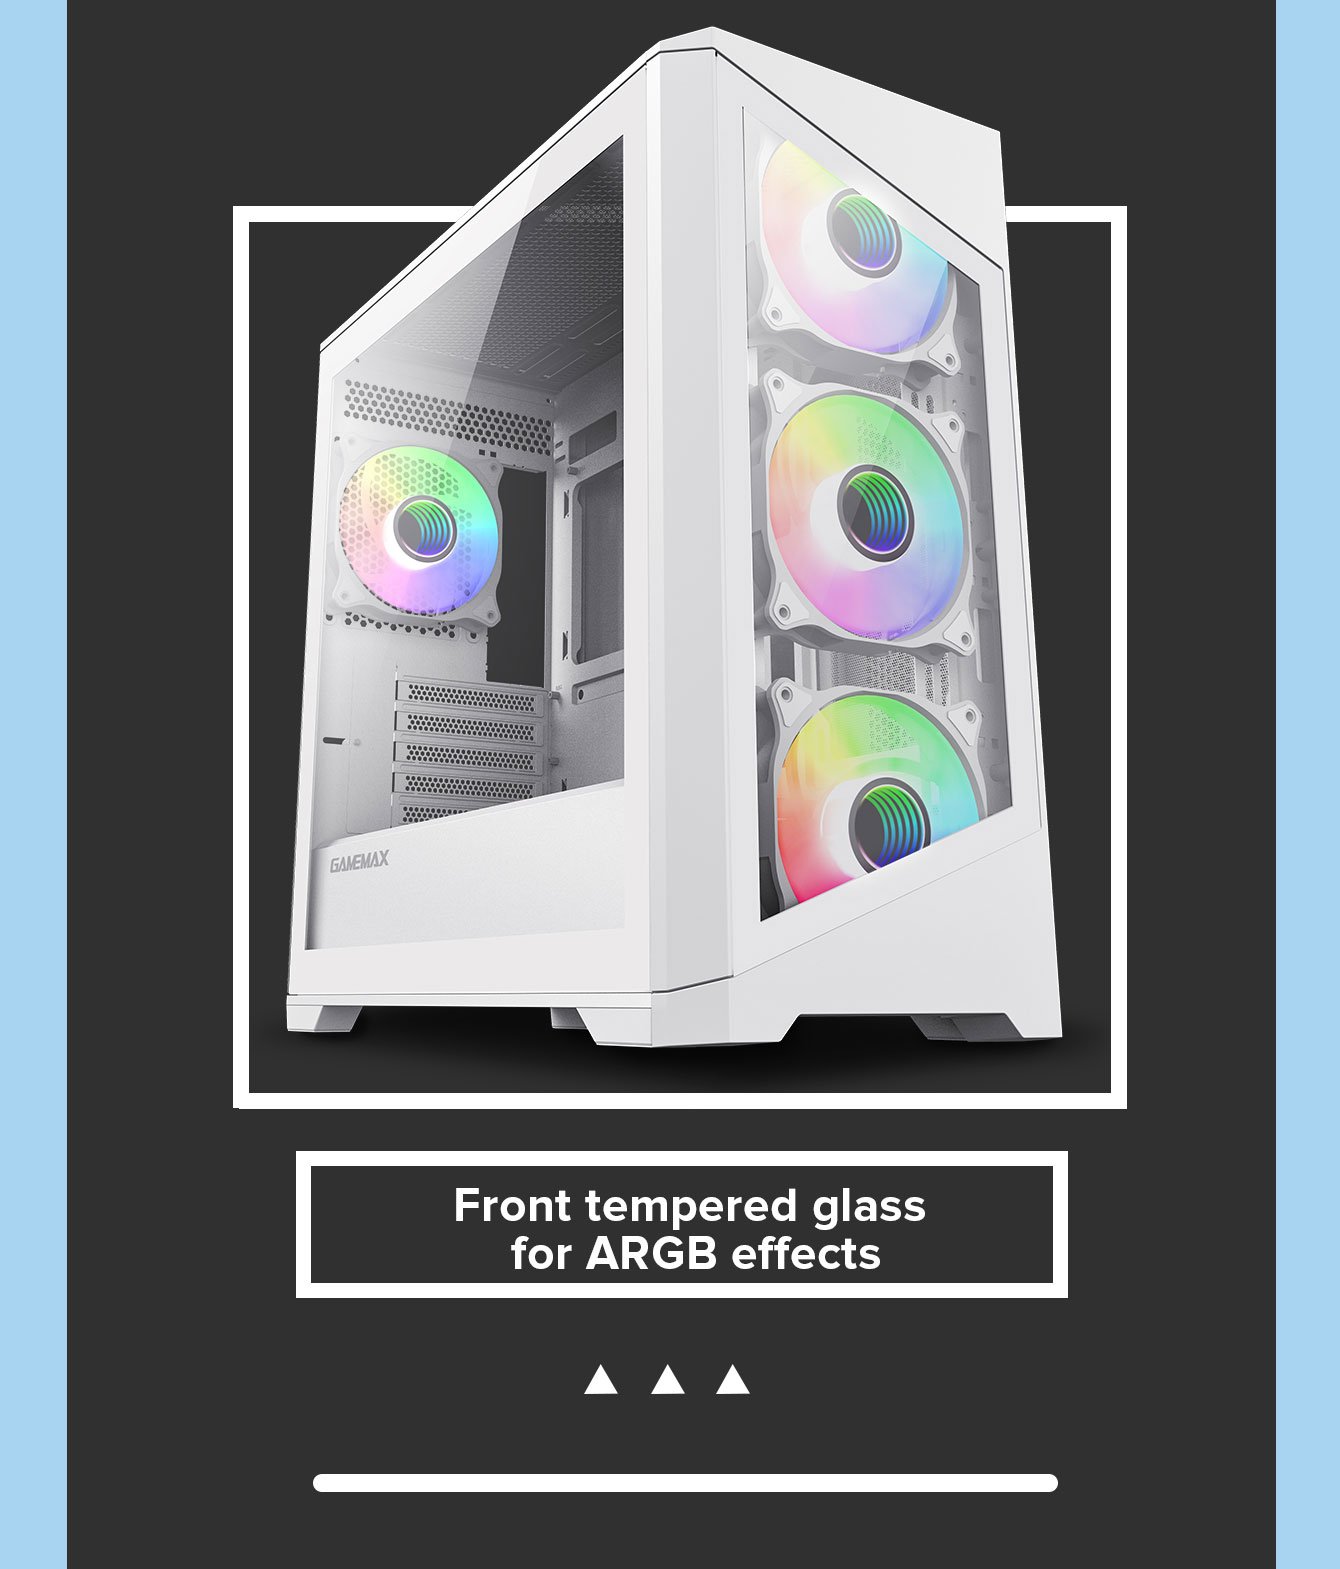 GAMEMAX Micro-ATX Tower Computer Case with Removable Dust-Proof Filter,  Dual Tempered Glass Side Panels, PC Gaming Chassis (Spark-White)